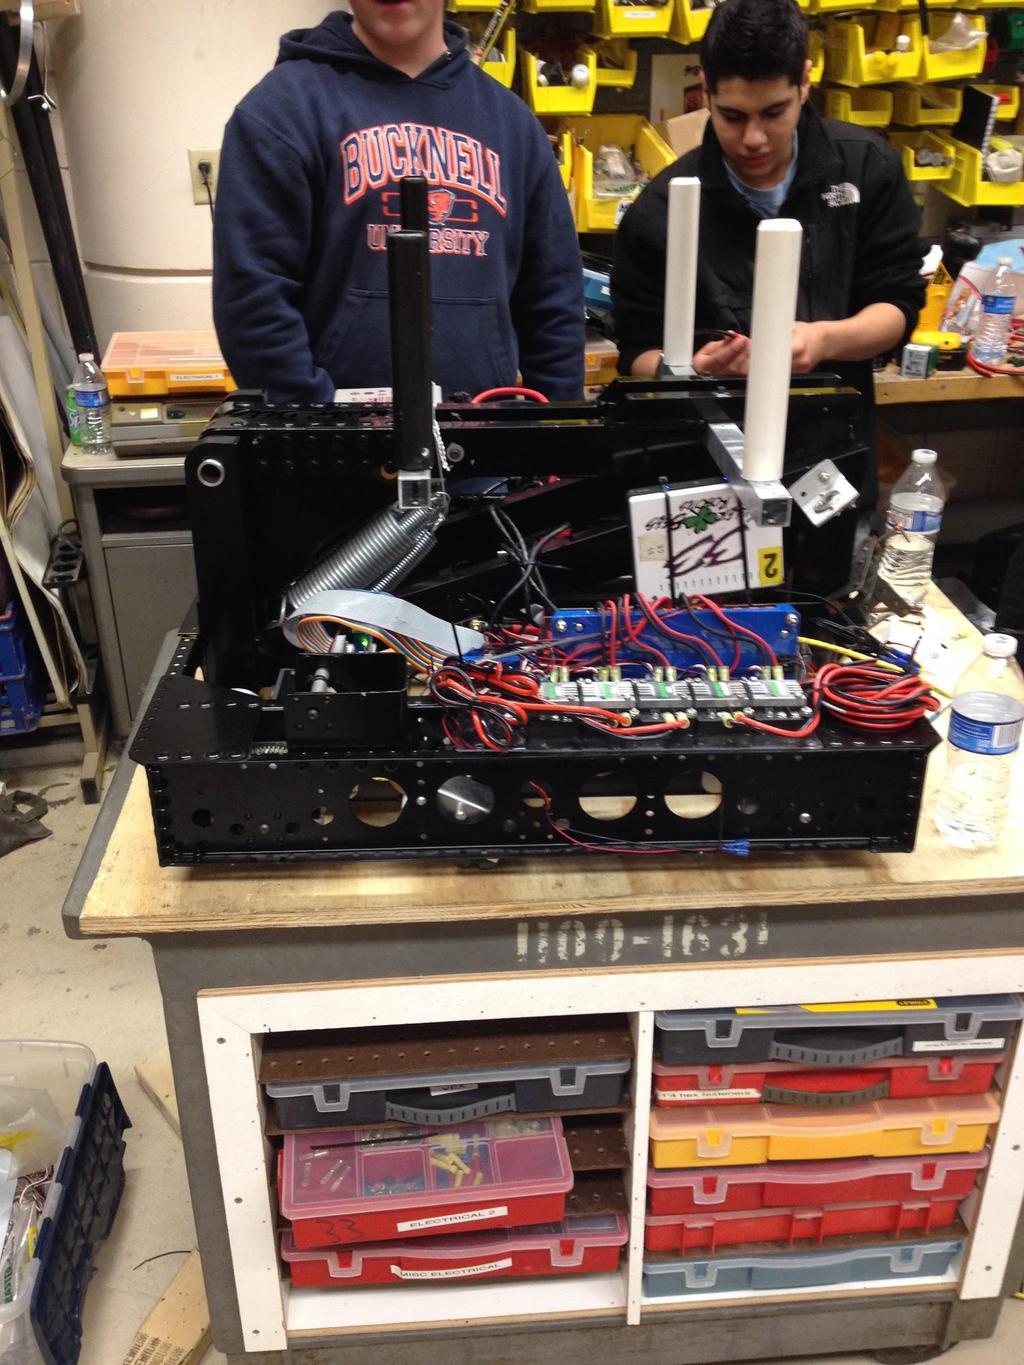 We chose a 4 wheel omnidirectional drive train, inspired by FRC Team 148 (2013) and Build Blitz